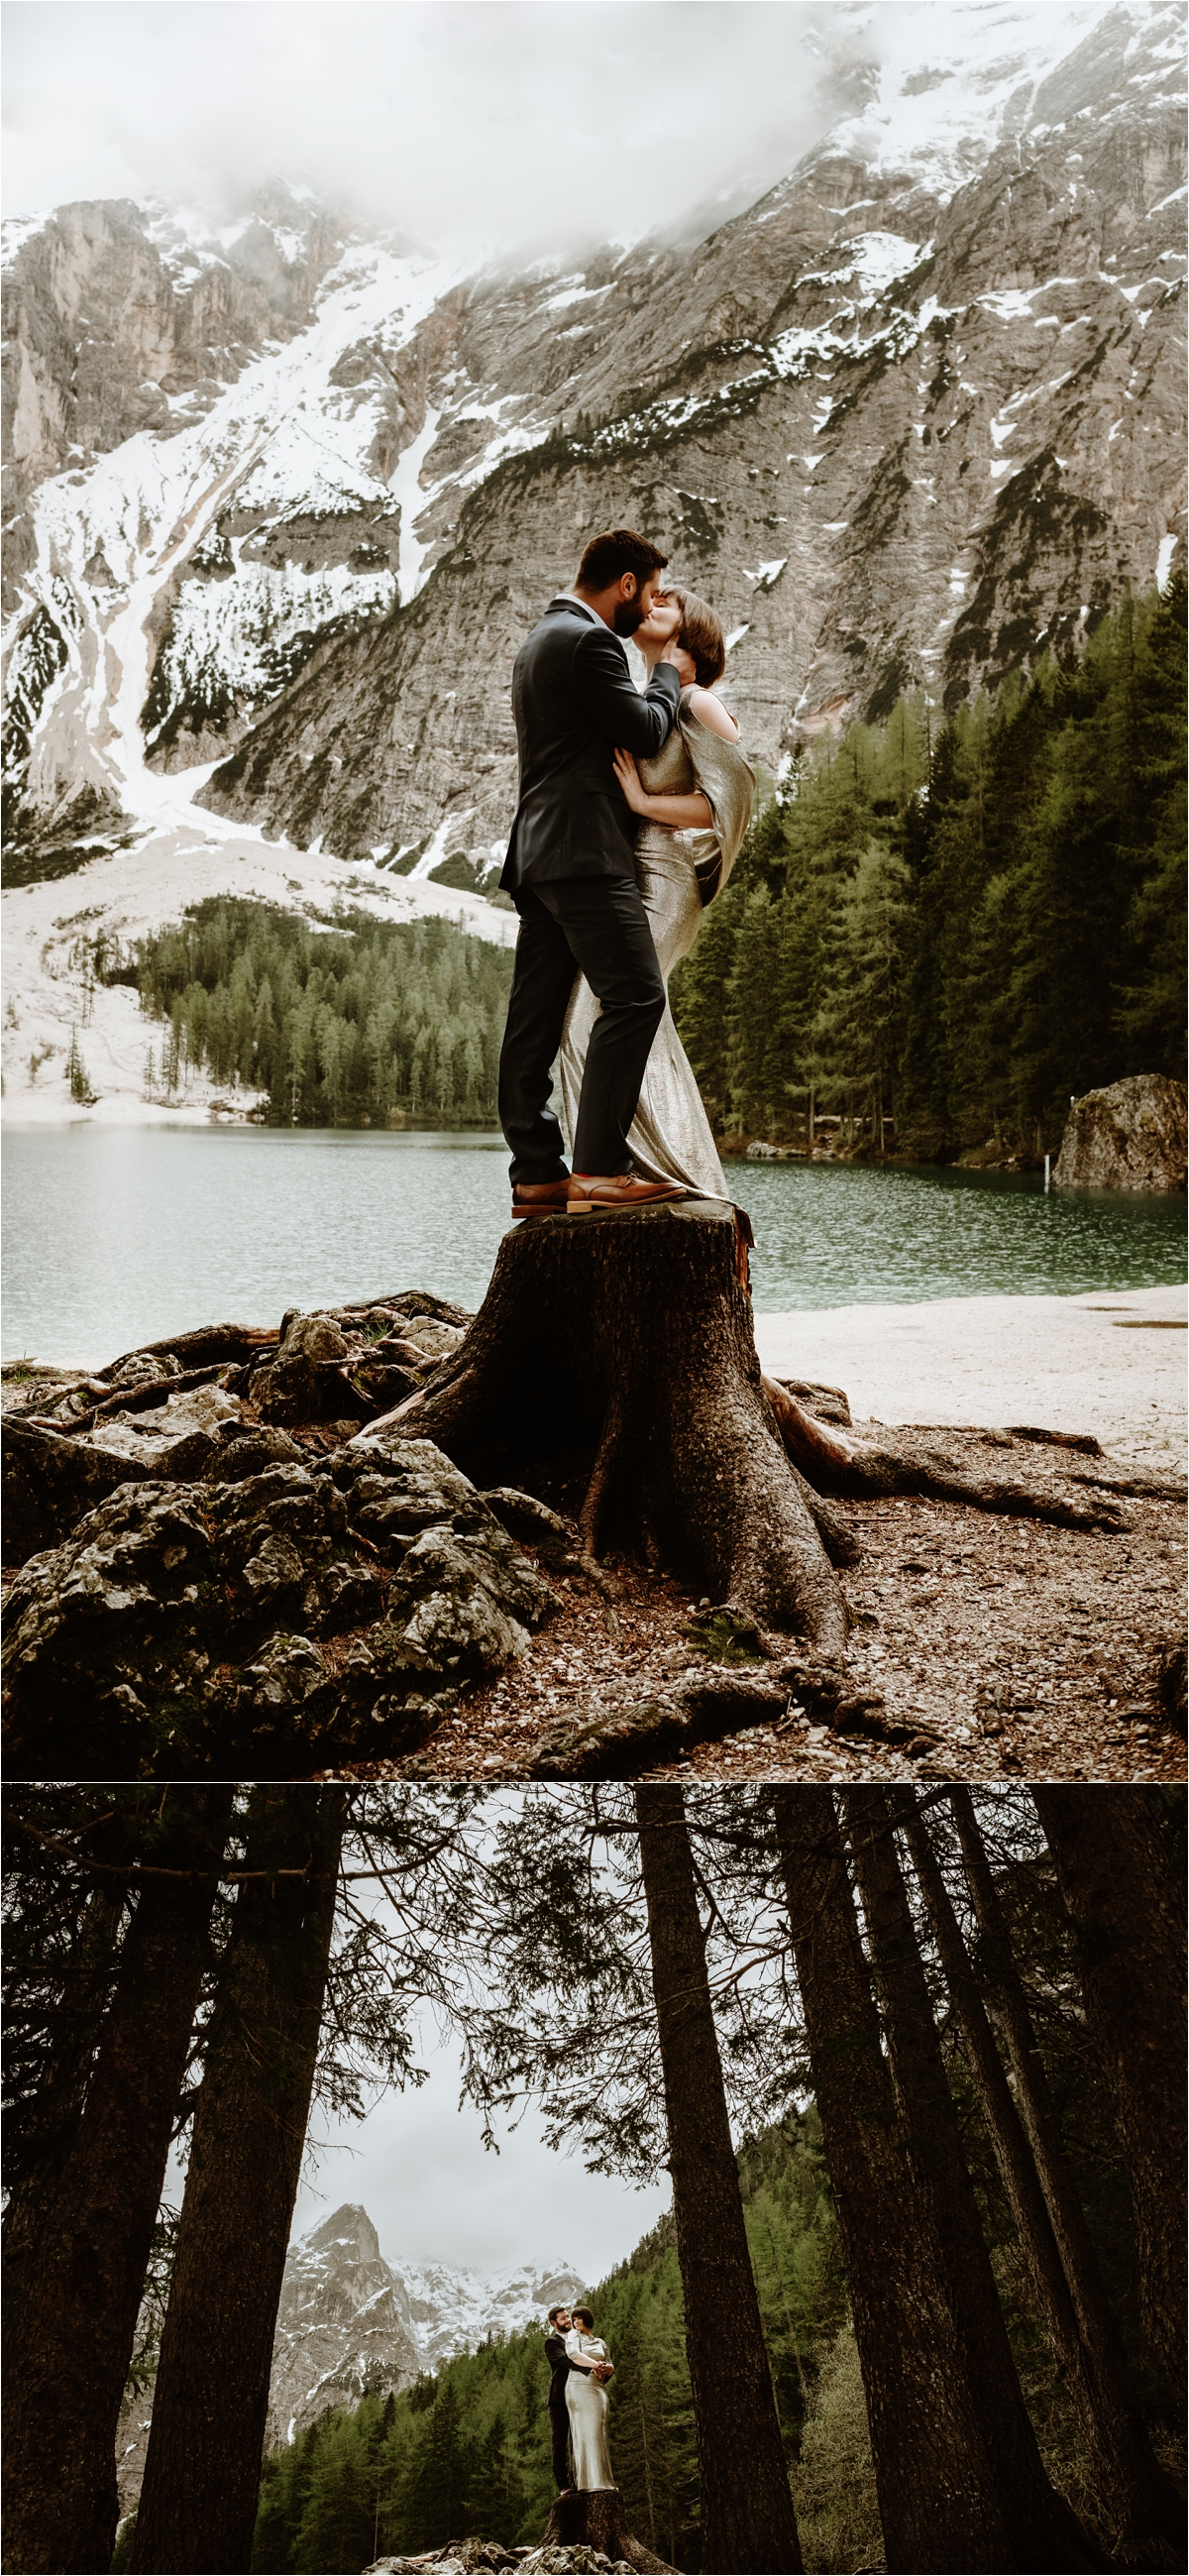 The bride and groom stand on a tree stump in the forest around Lake Braies. The bride wears a gold wedding gown. Photo by Wild Connections Photography